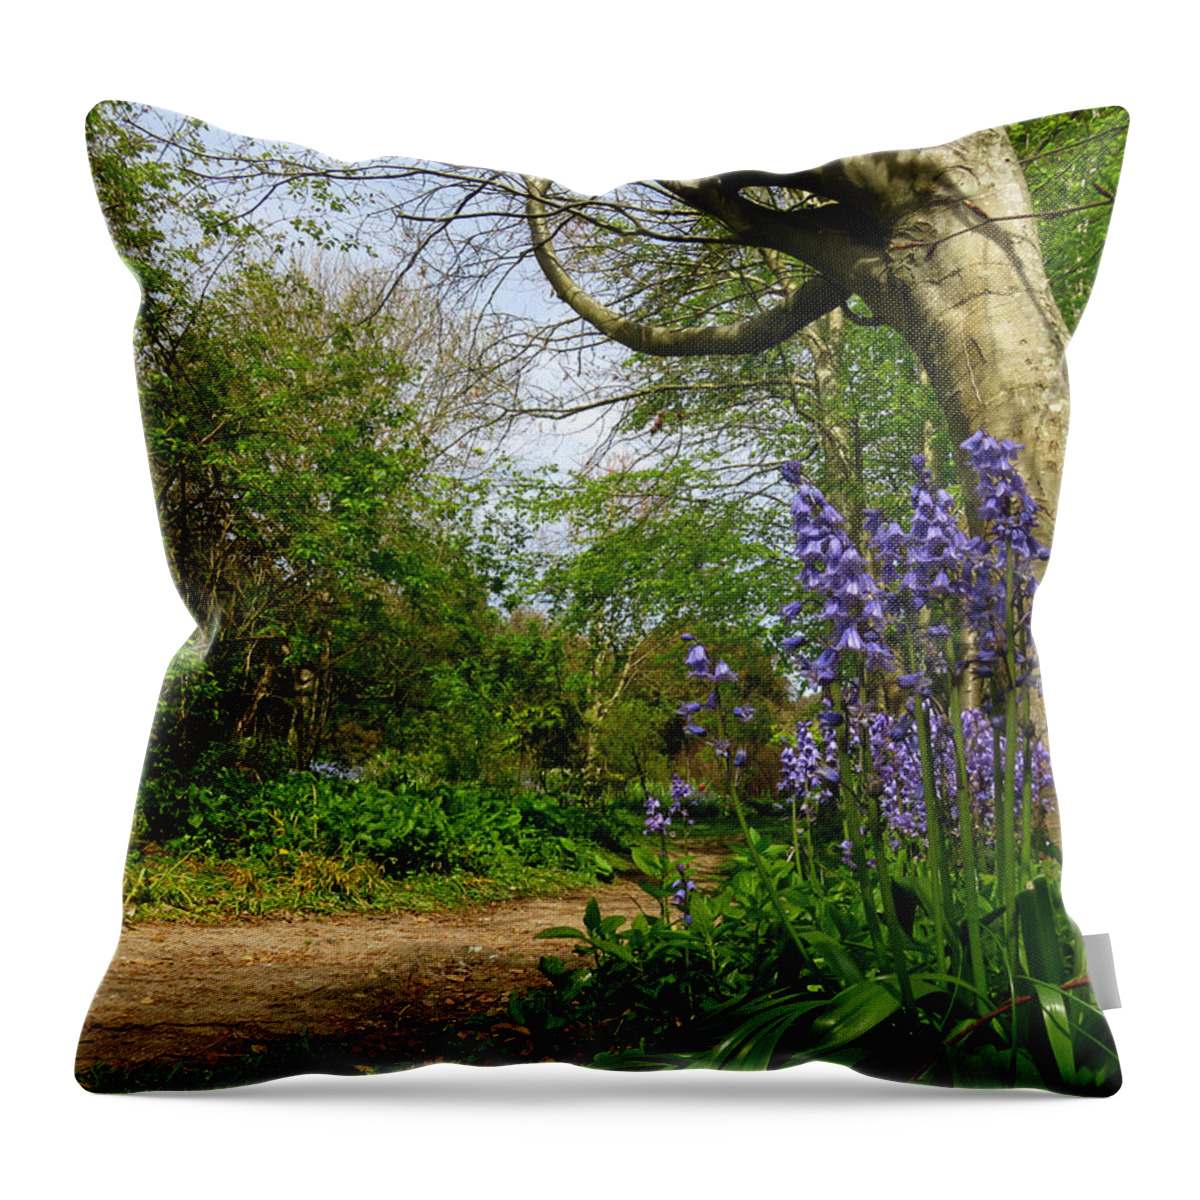 Bluebells Throw Pillow featuring the photograph Bluebells By The Tree by John Topman